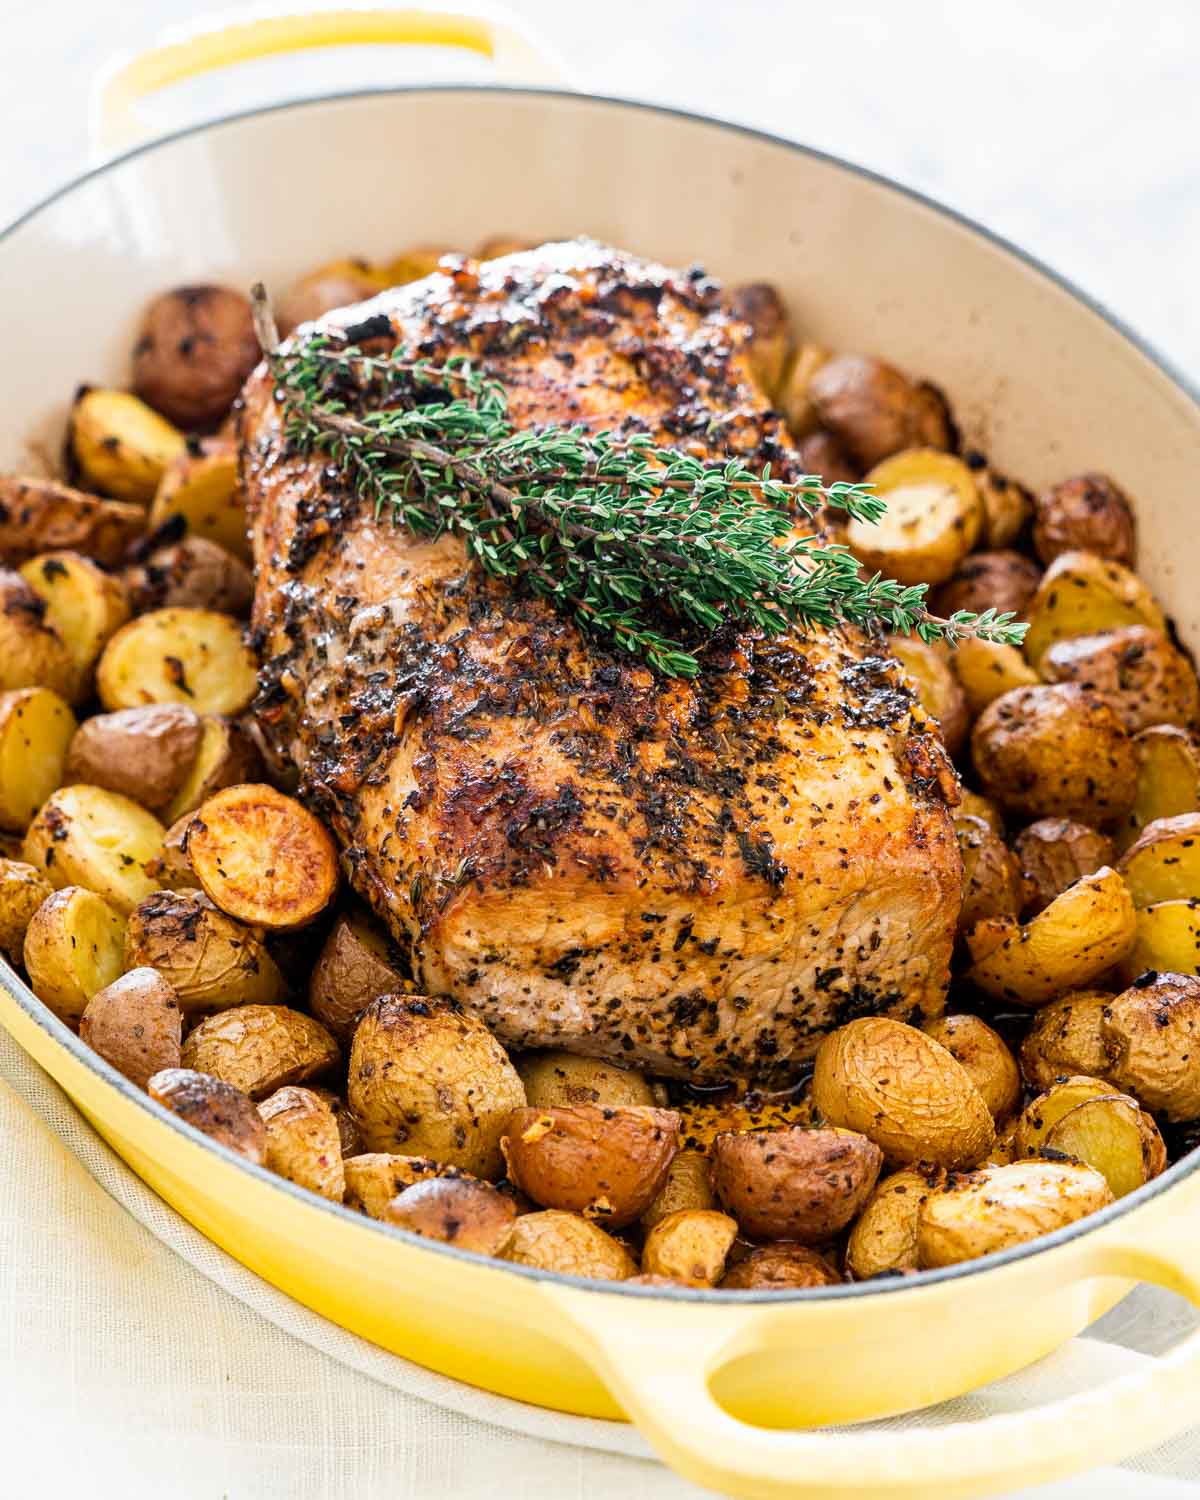 pork roast with roasted potatoes garnished with fresh thyme